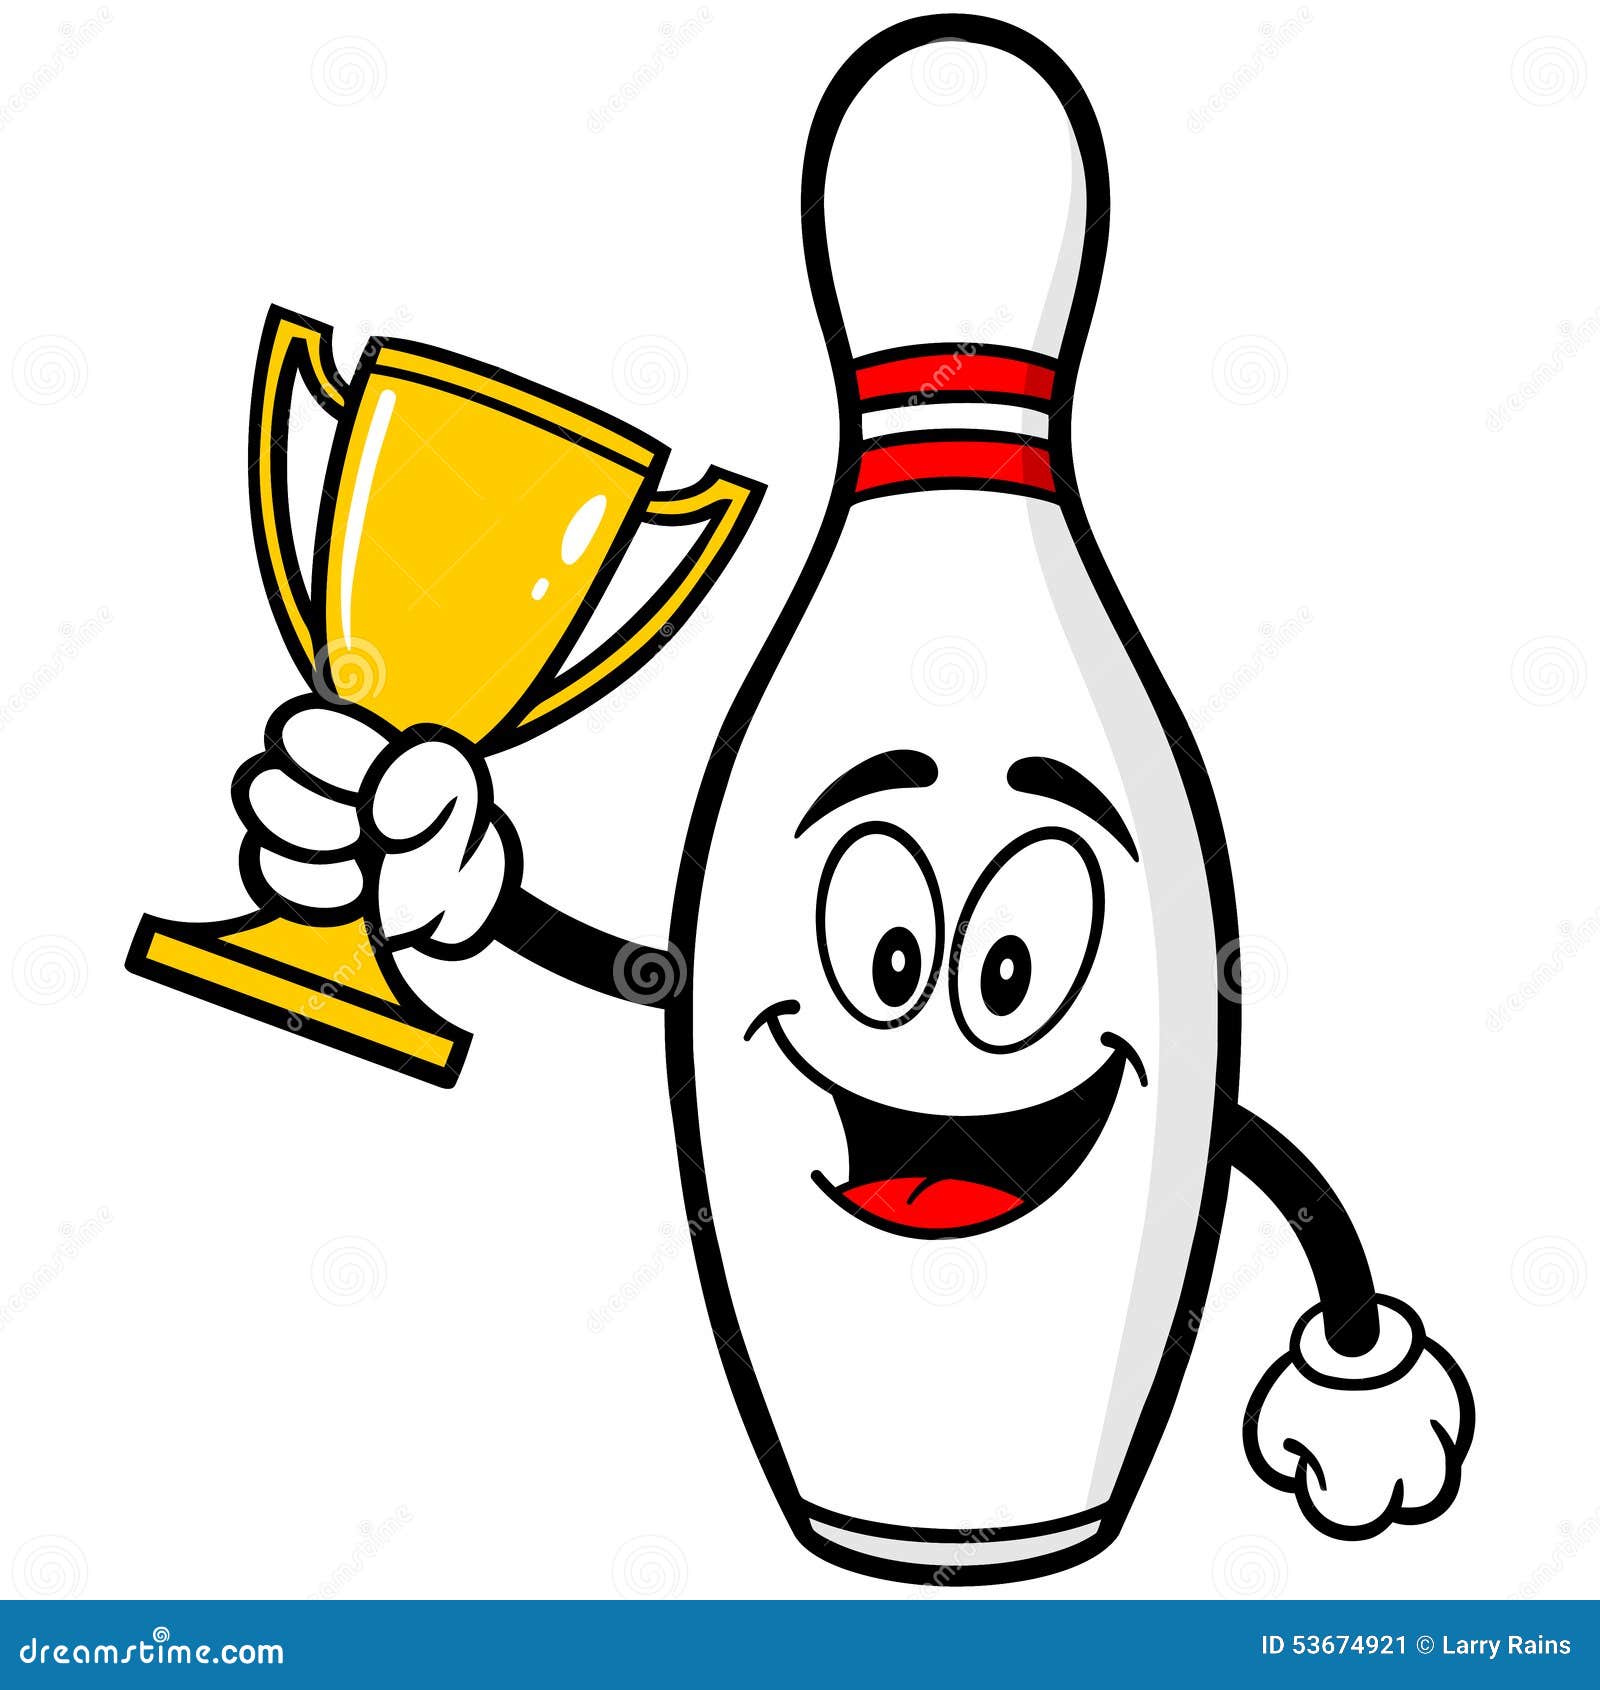 free animated bowling clipart - photo #32